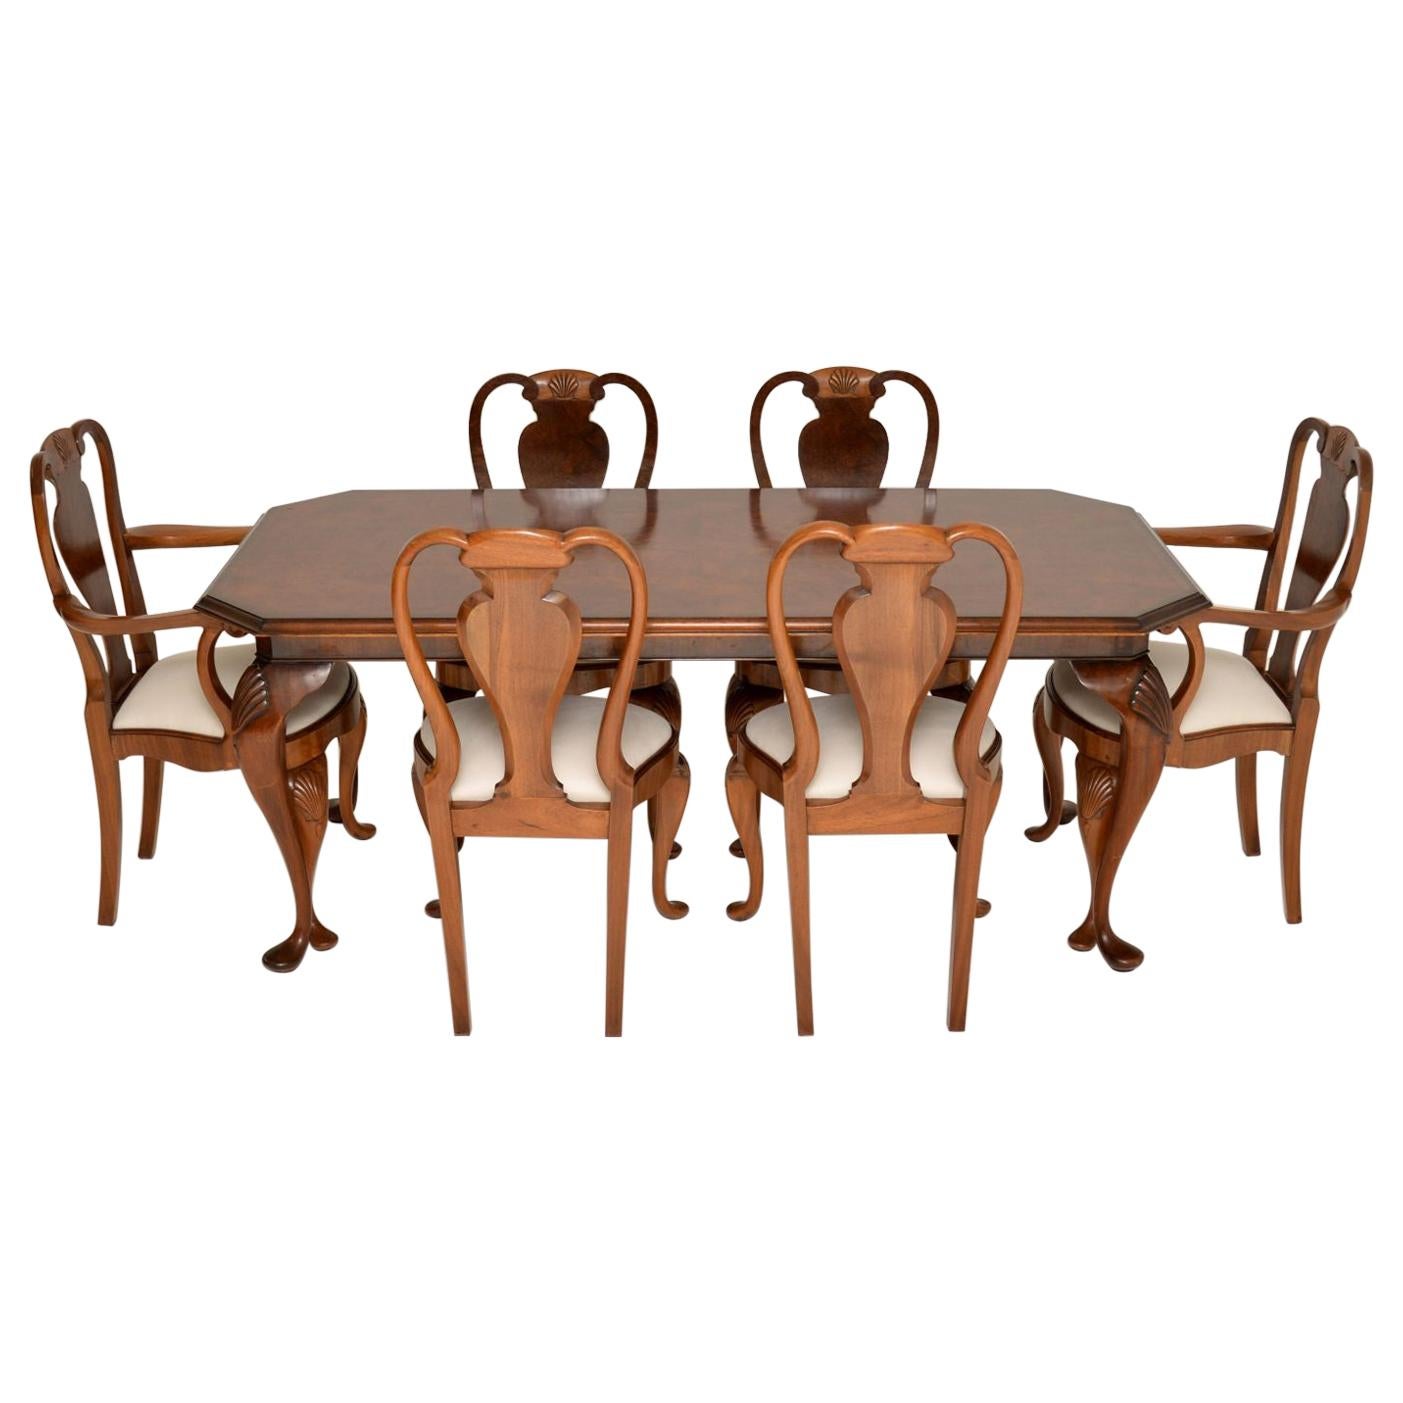 Antique Queen Anne Style Burr Walnut Dining Chairs and Table